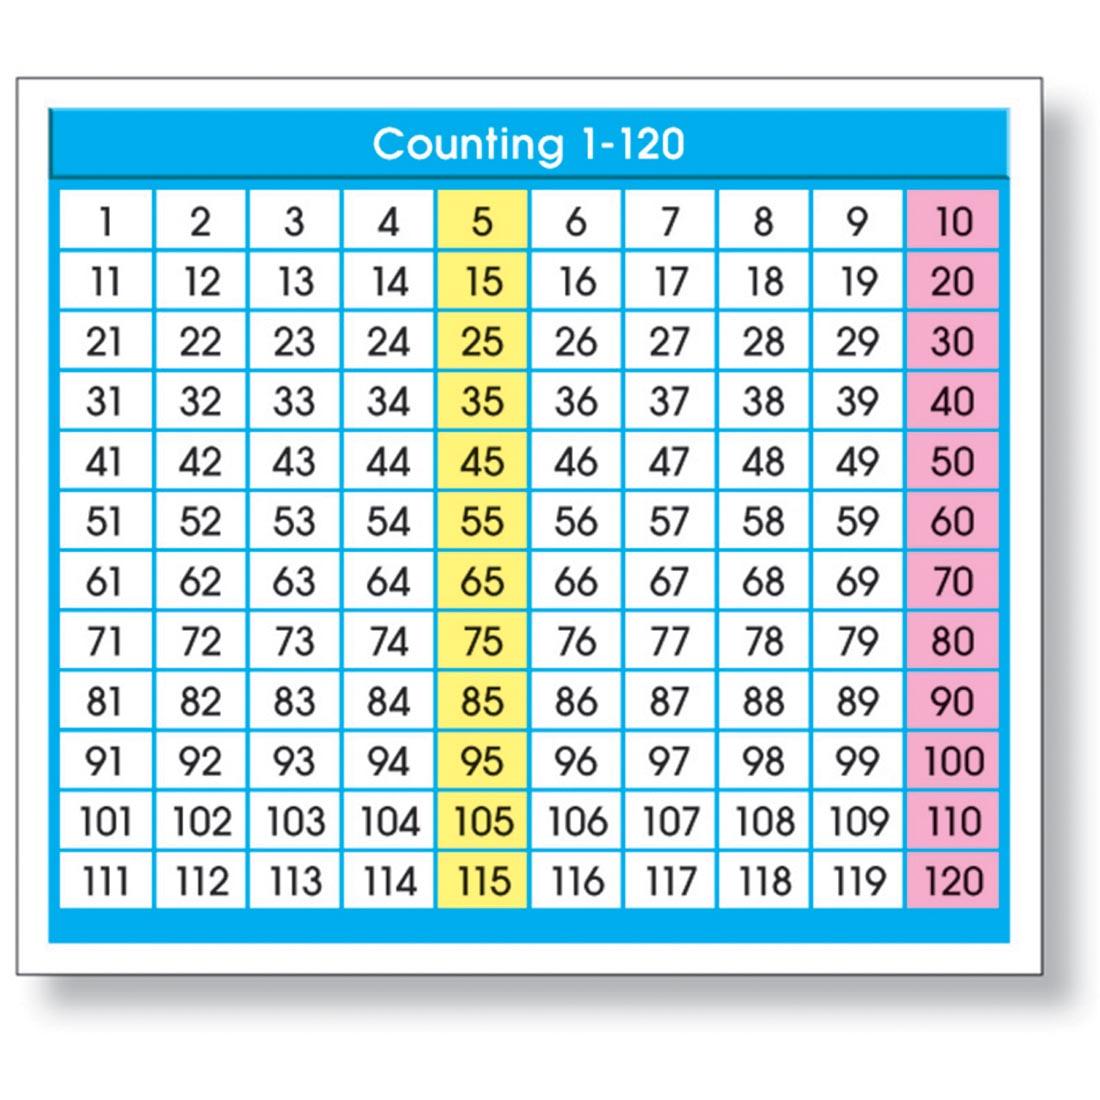 Adhesive Counting 1-120 Chart Desk reference